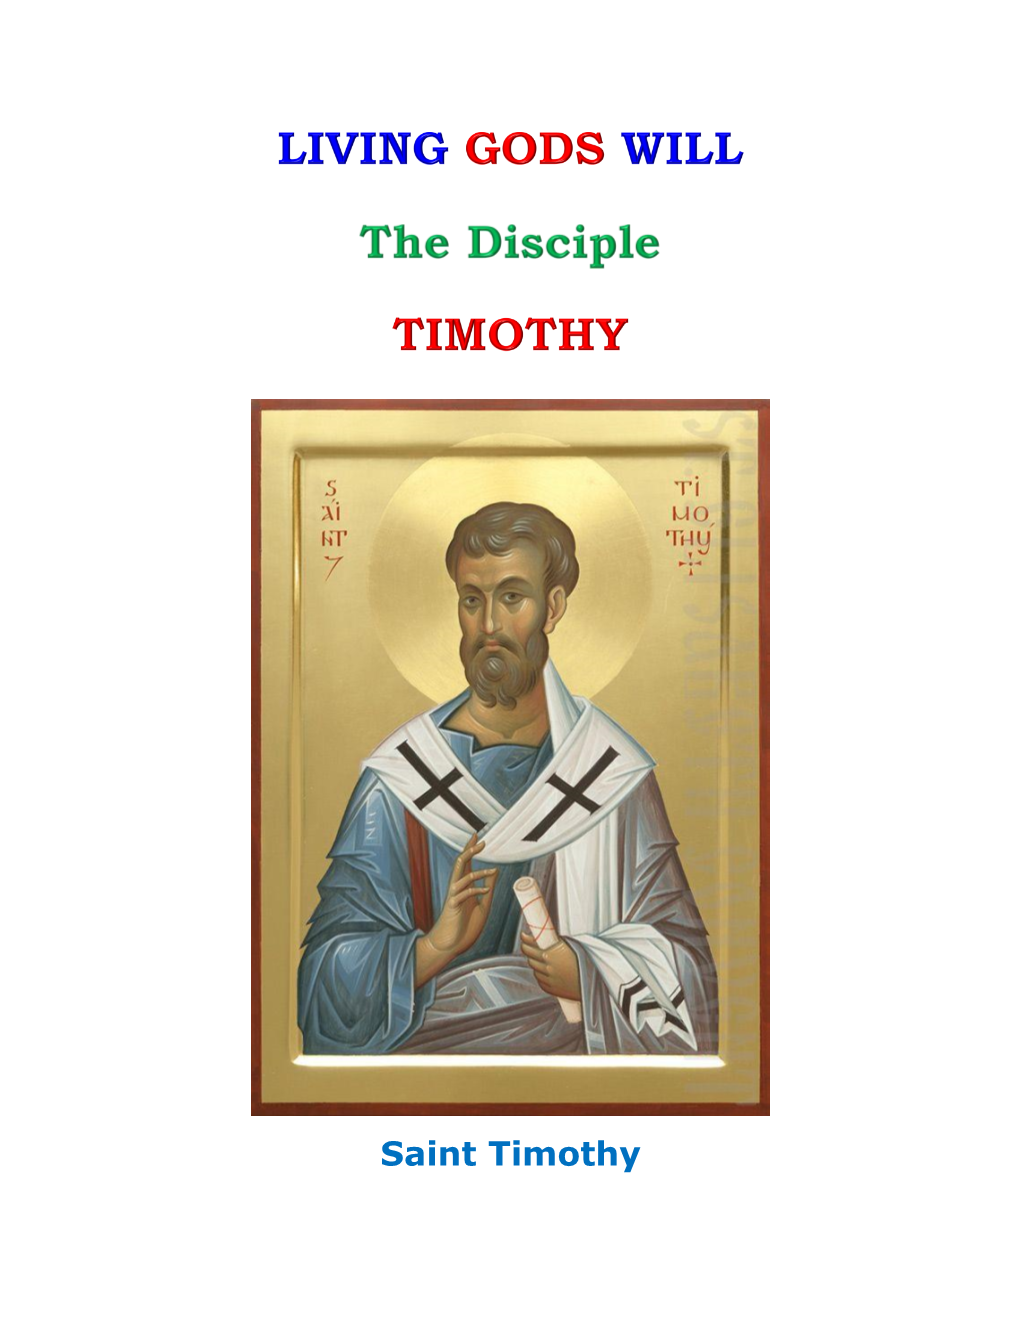 Saint Timothy the Disciple TIMOTHY Page 1